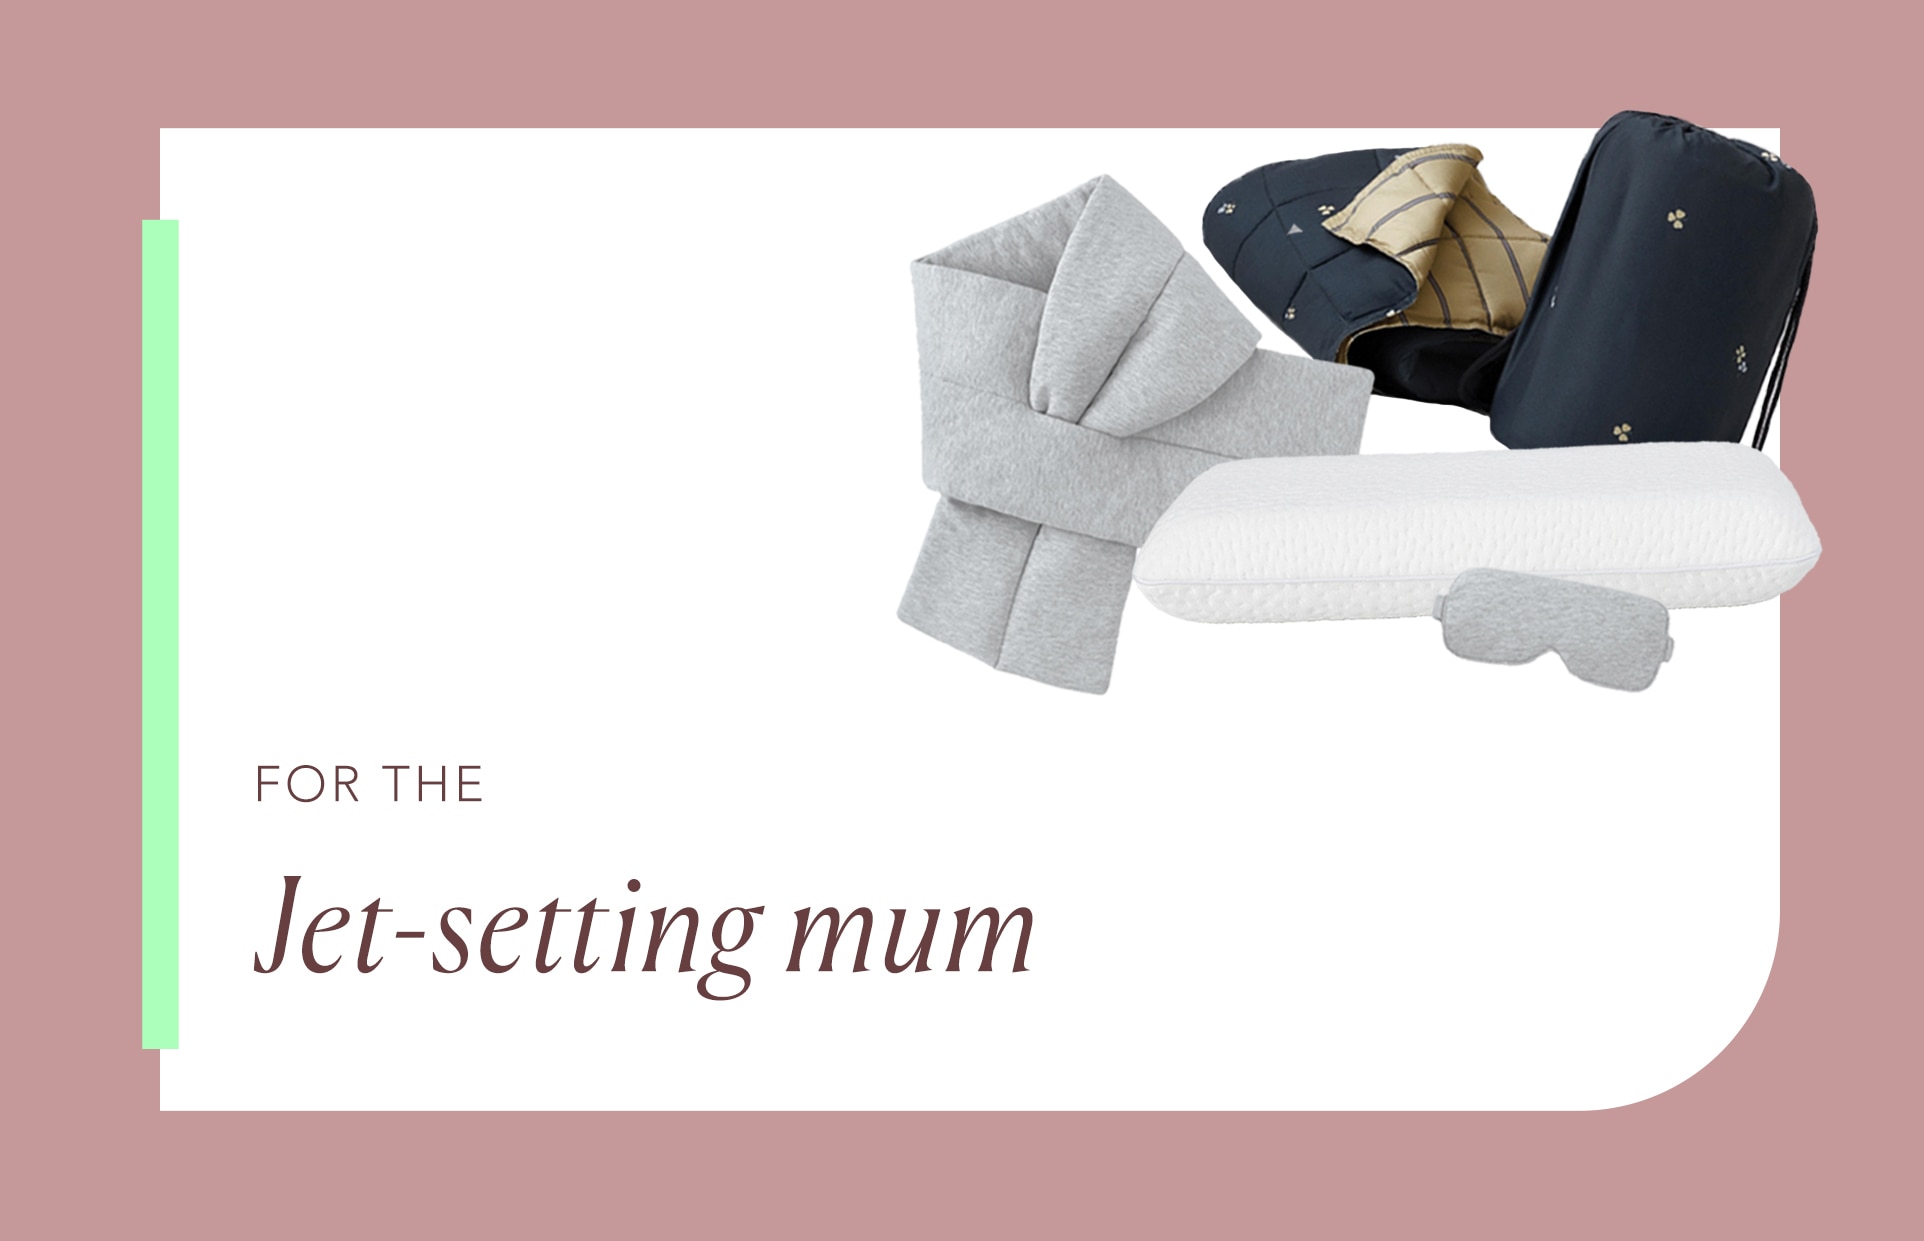 Mother’s day gift guide Australia. Banner with the wording for the jet setting mum, with a cluster of products in the corner.